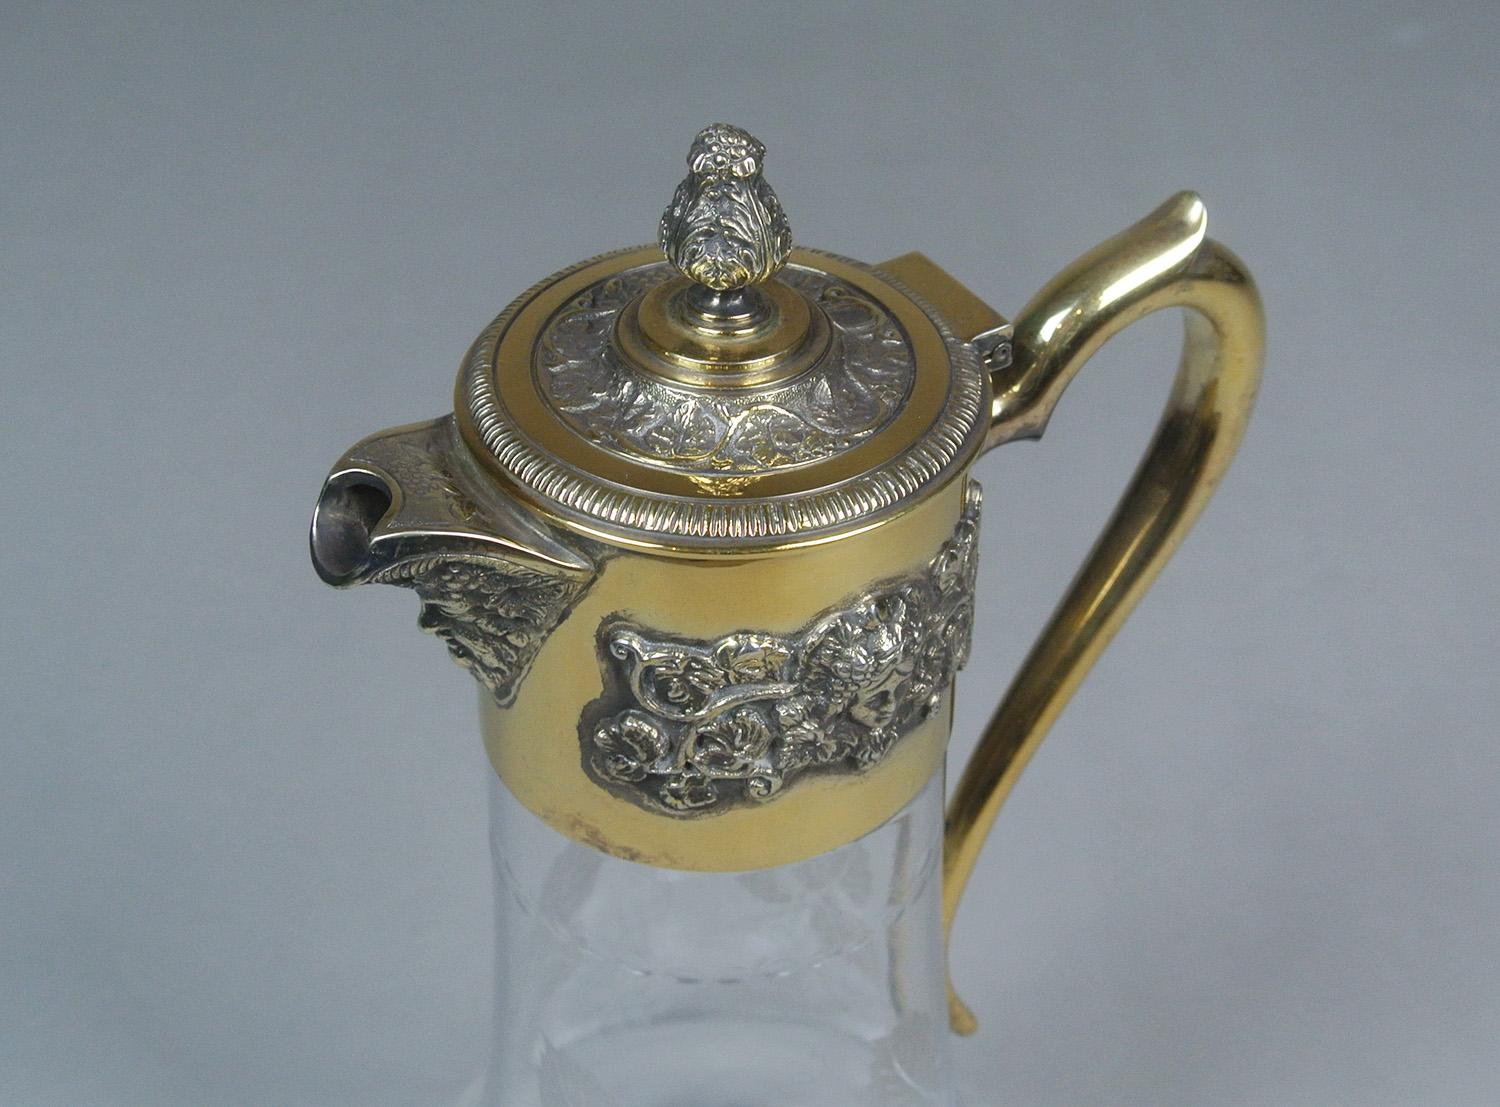 A beautiful crystal claret jug made by Asprey & Co with solid silver and gold gilded mount applied with Bacchanalian masks and vines, the spout formed as Bacchus mask, the hinged cover with acanthus bud, silver stamped and Asprey marked on mount and